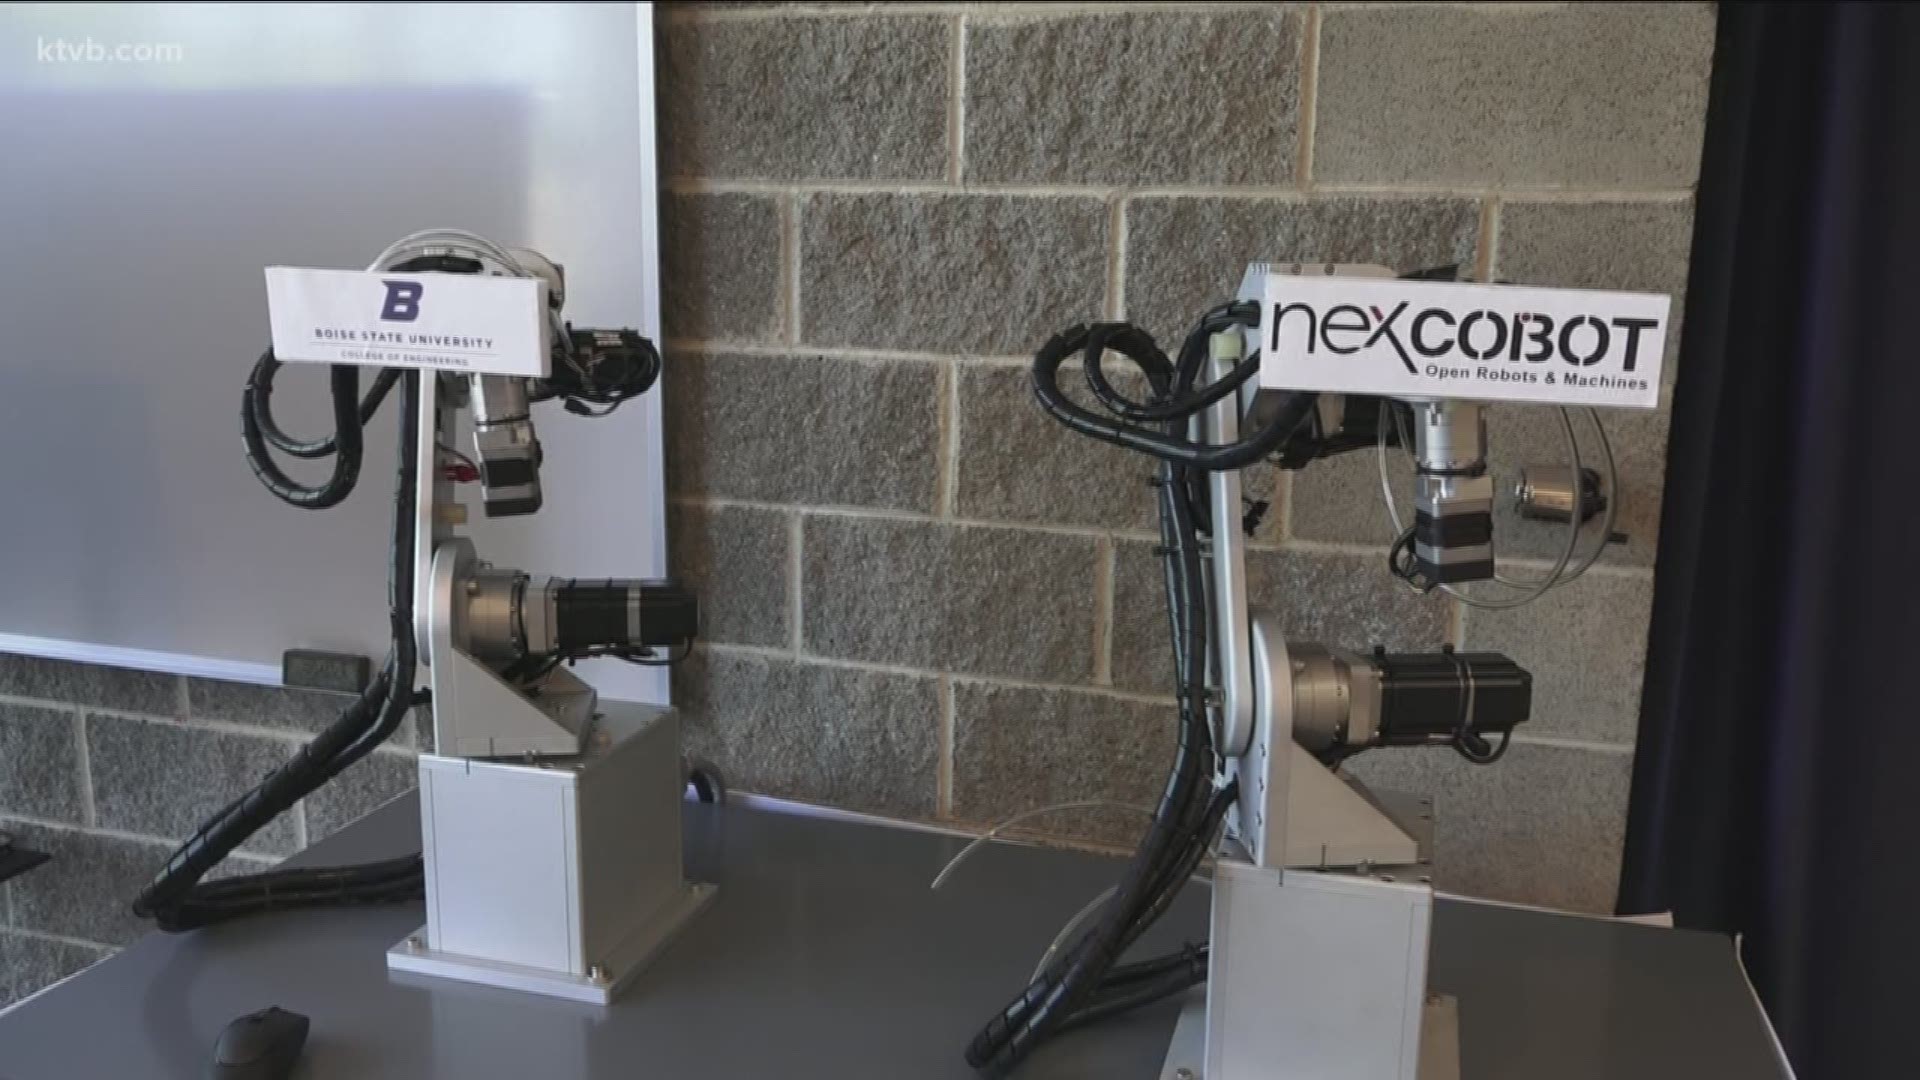 The university is getting four new robots for its engineering program.